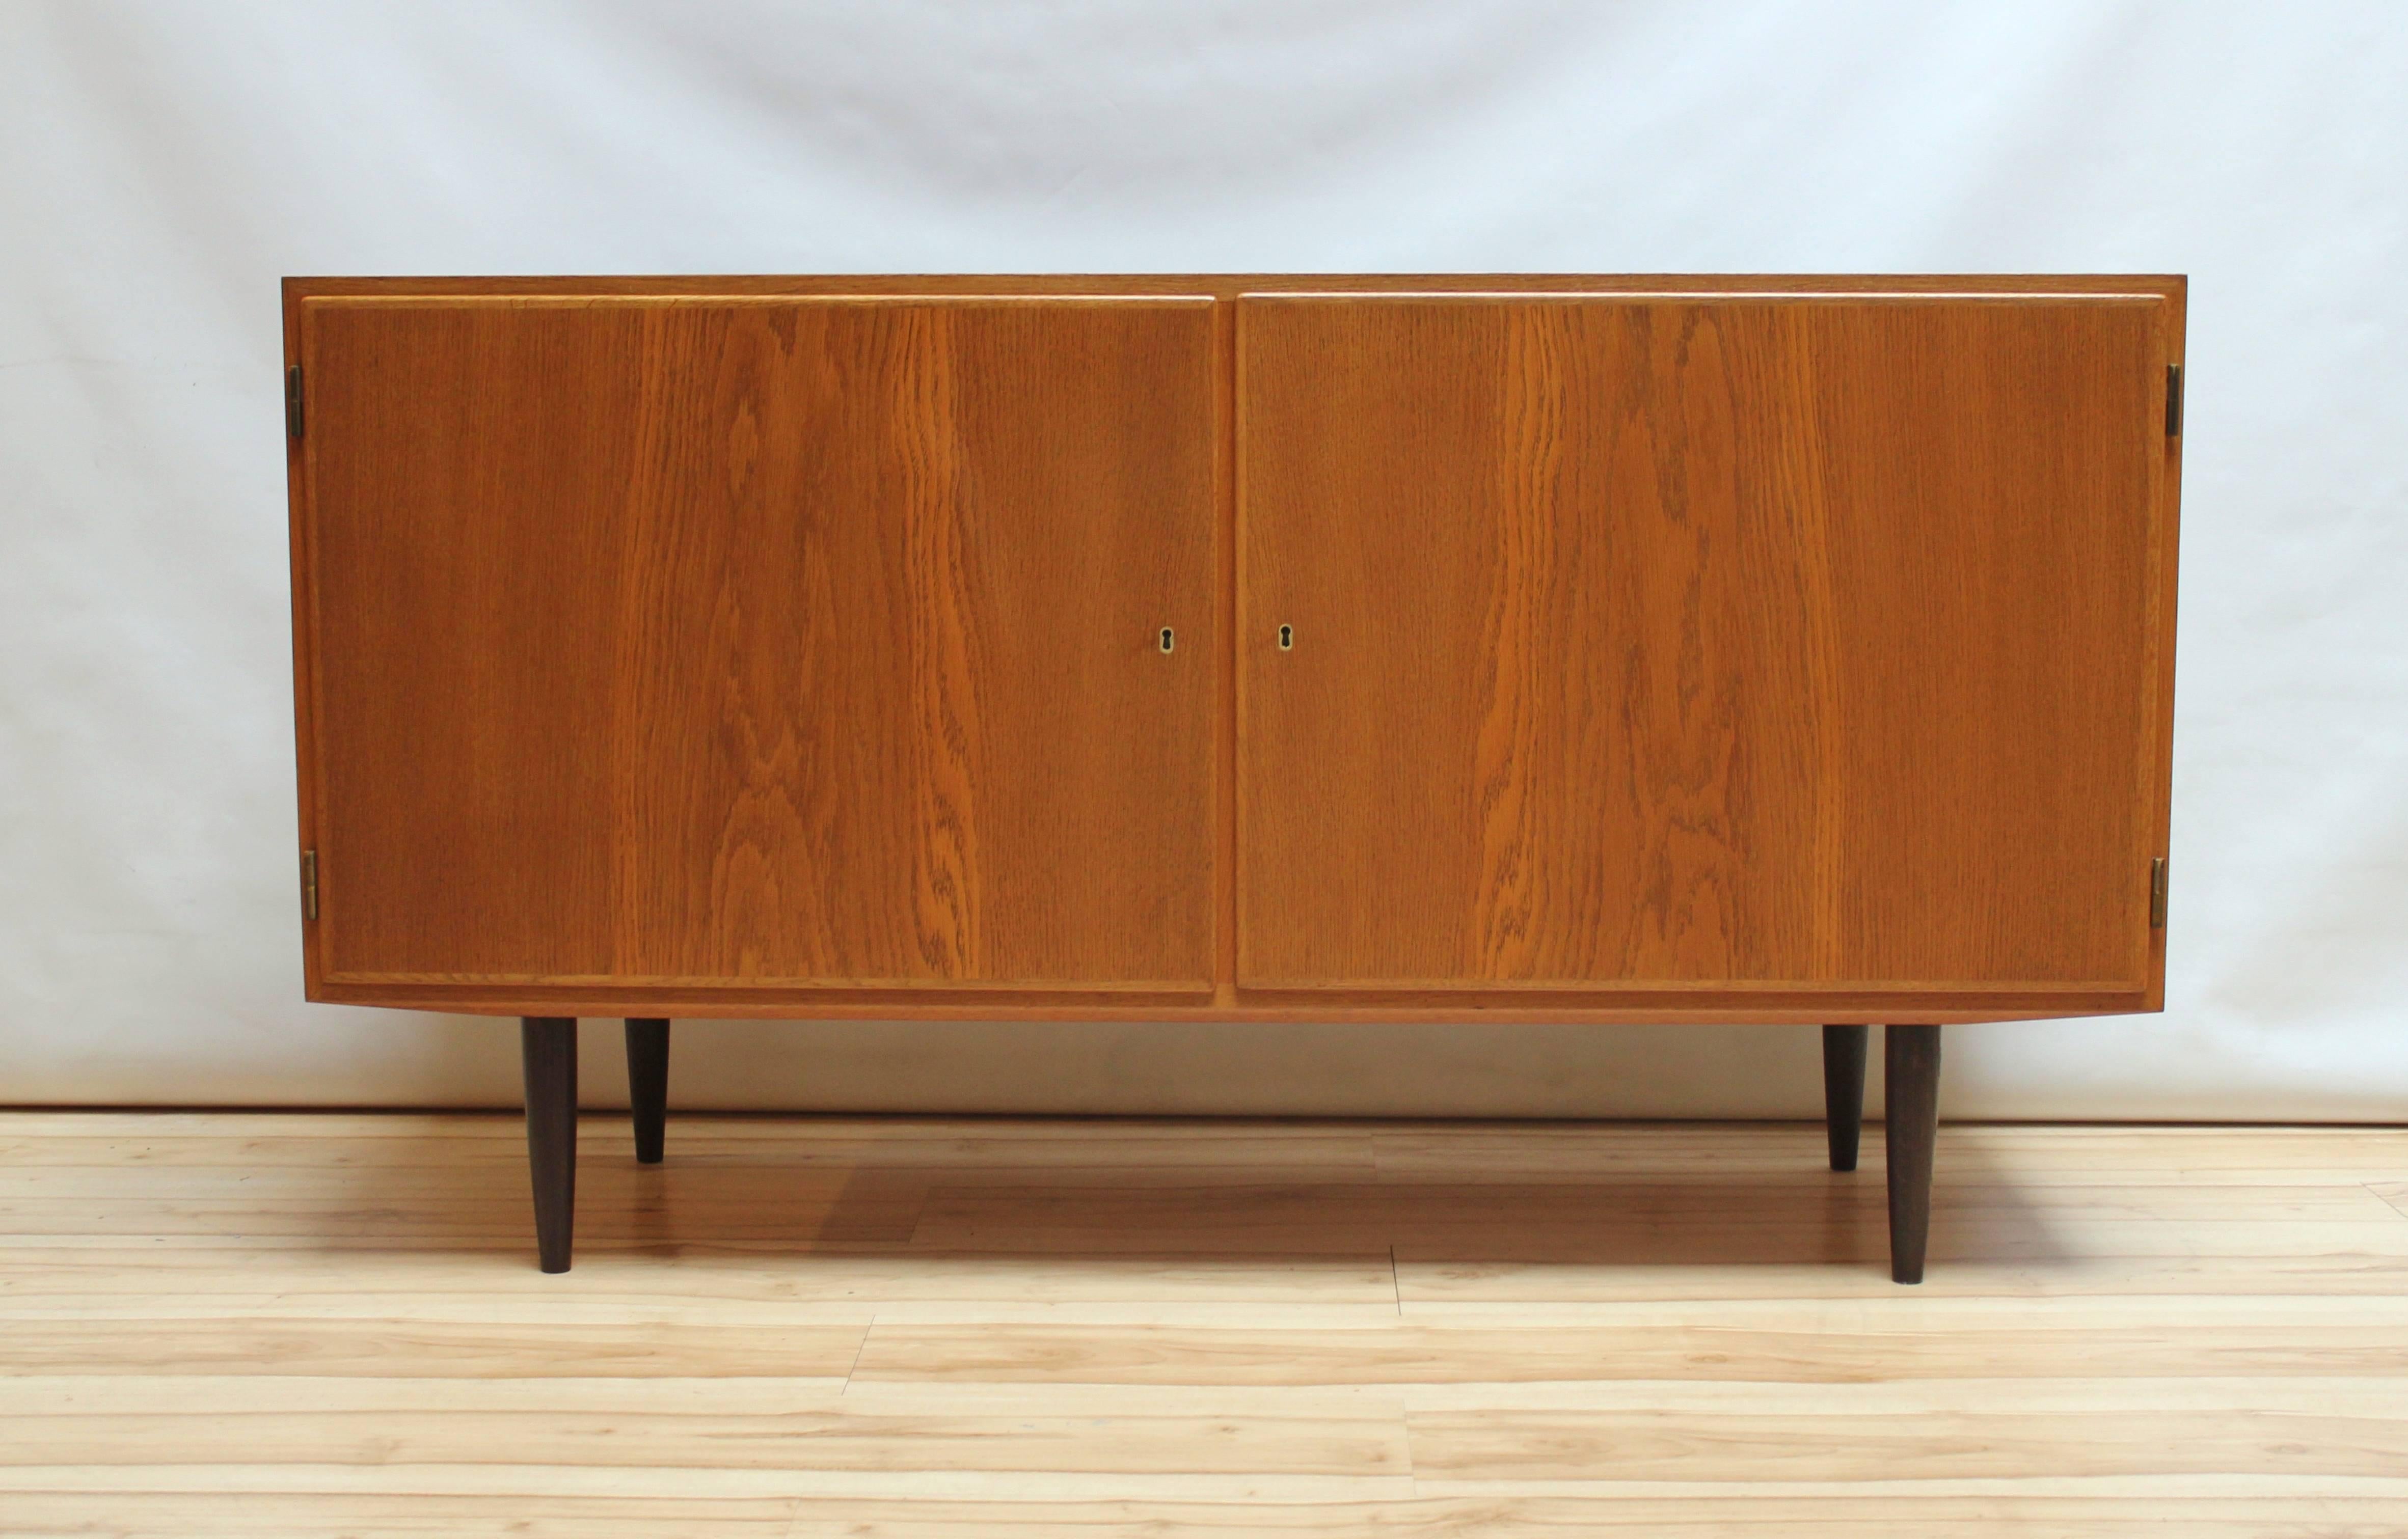 1960s Danish Modern credenza/buffet by Poul Hundevad, The credenza features two locking doors with six drawers on one side and an adjustable shelf on the other. Very clean, Classic lines, with nothing unnecessary or inessential.